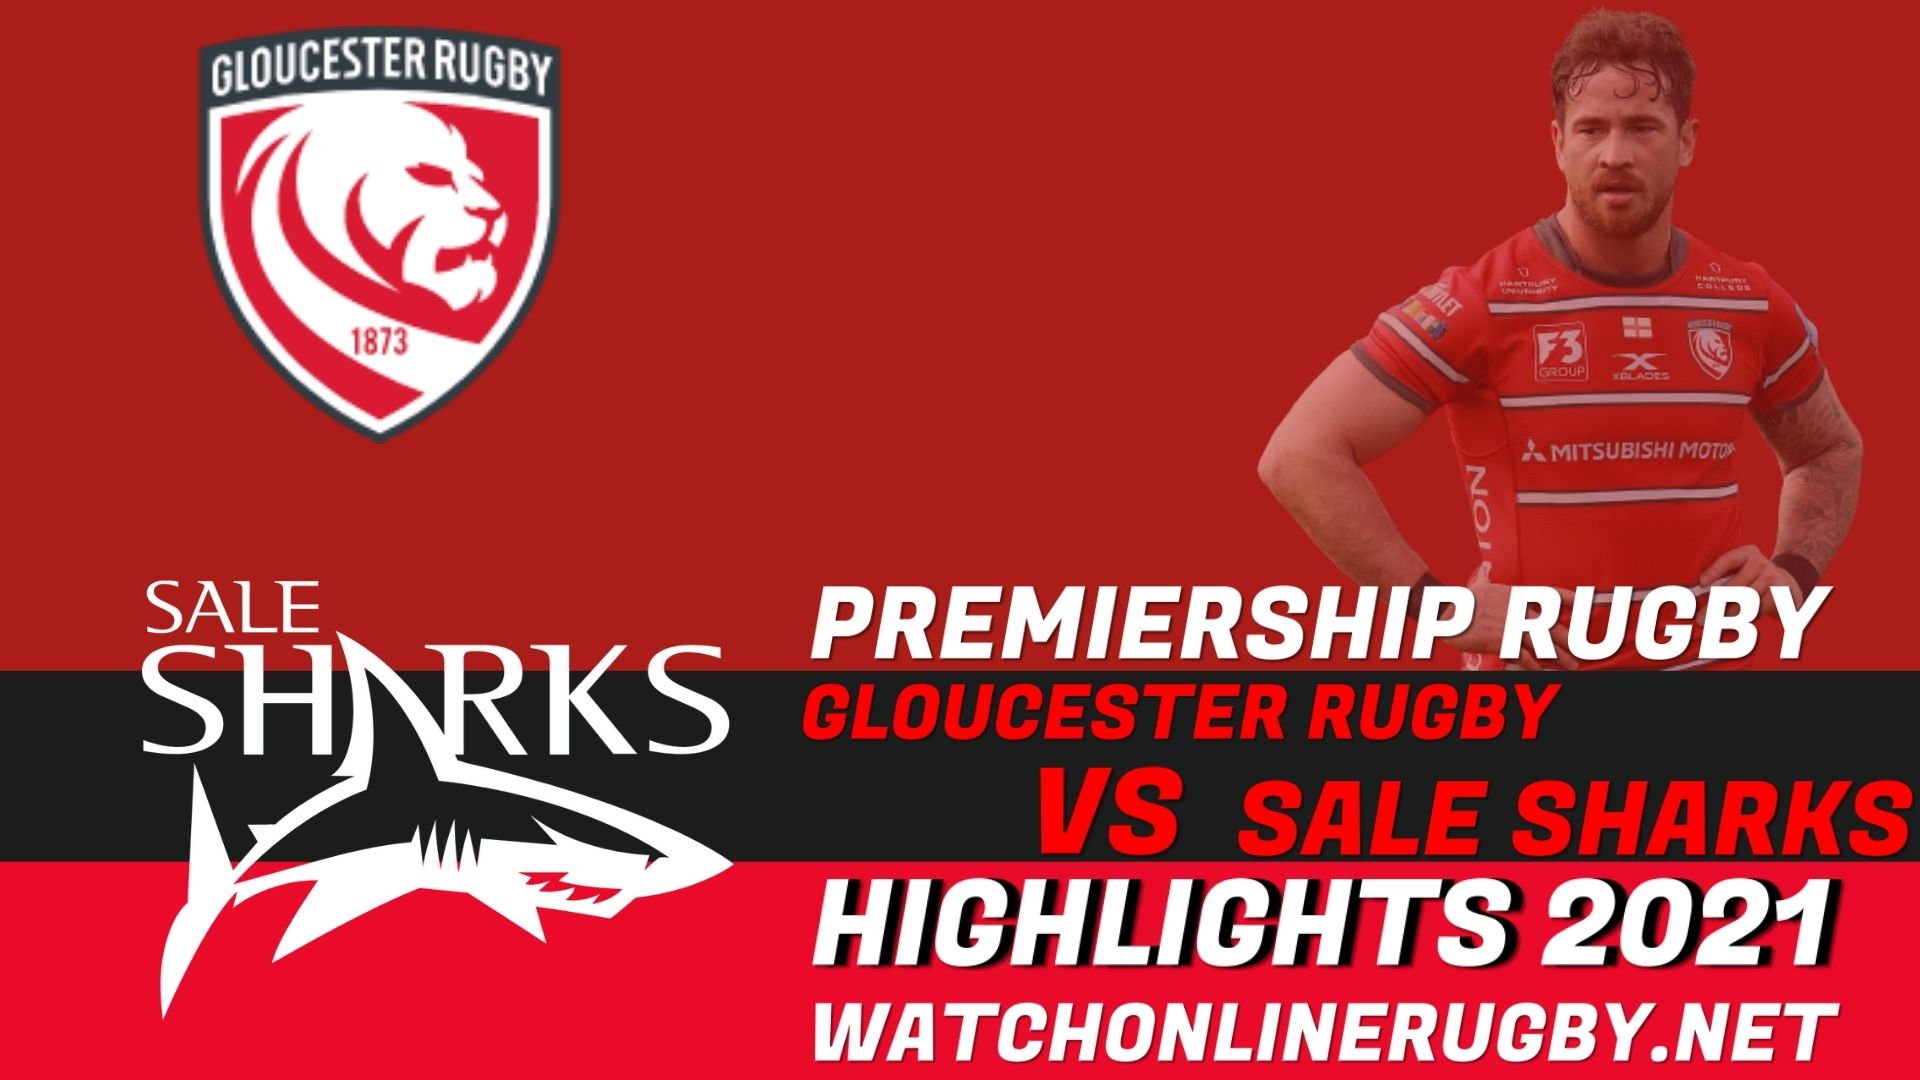 Gloucester Rugby Vs Sale Sharks Premiership Rugby 2021 RD 4